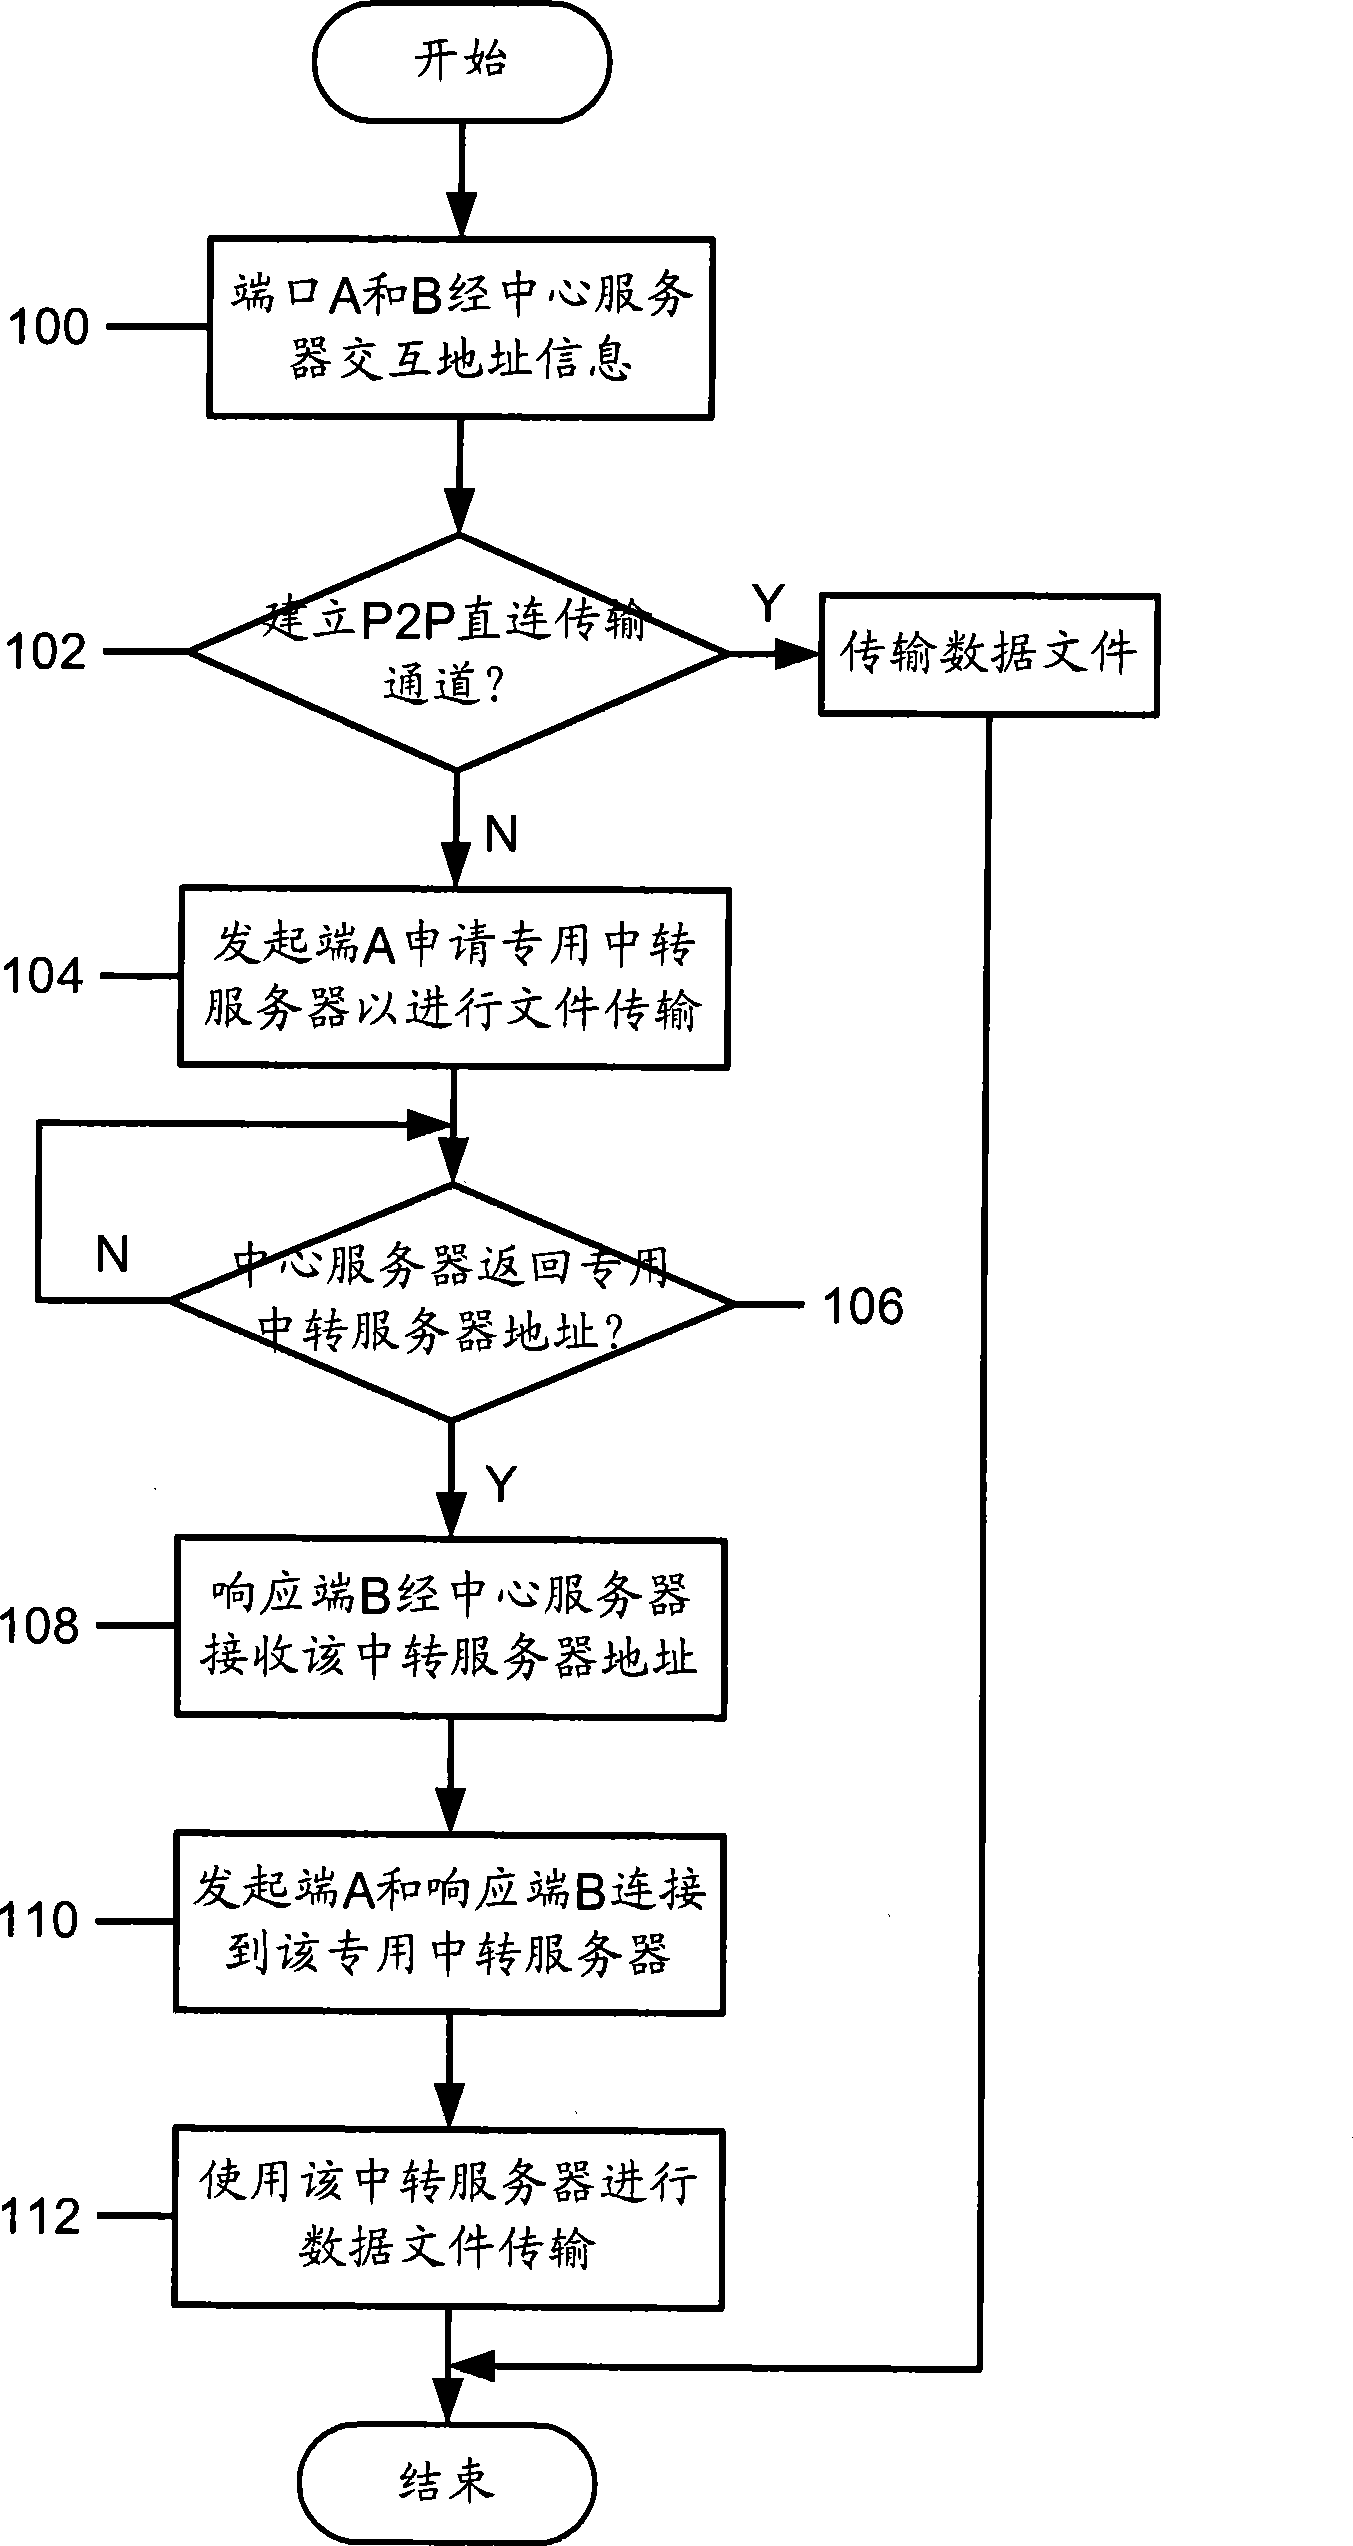 Method and apparatus for optimizing data transmission route between clients